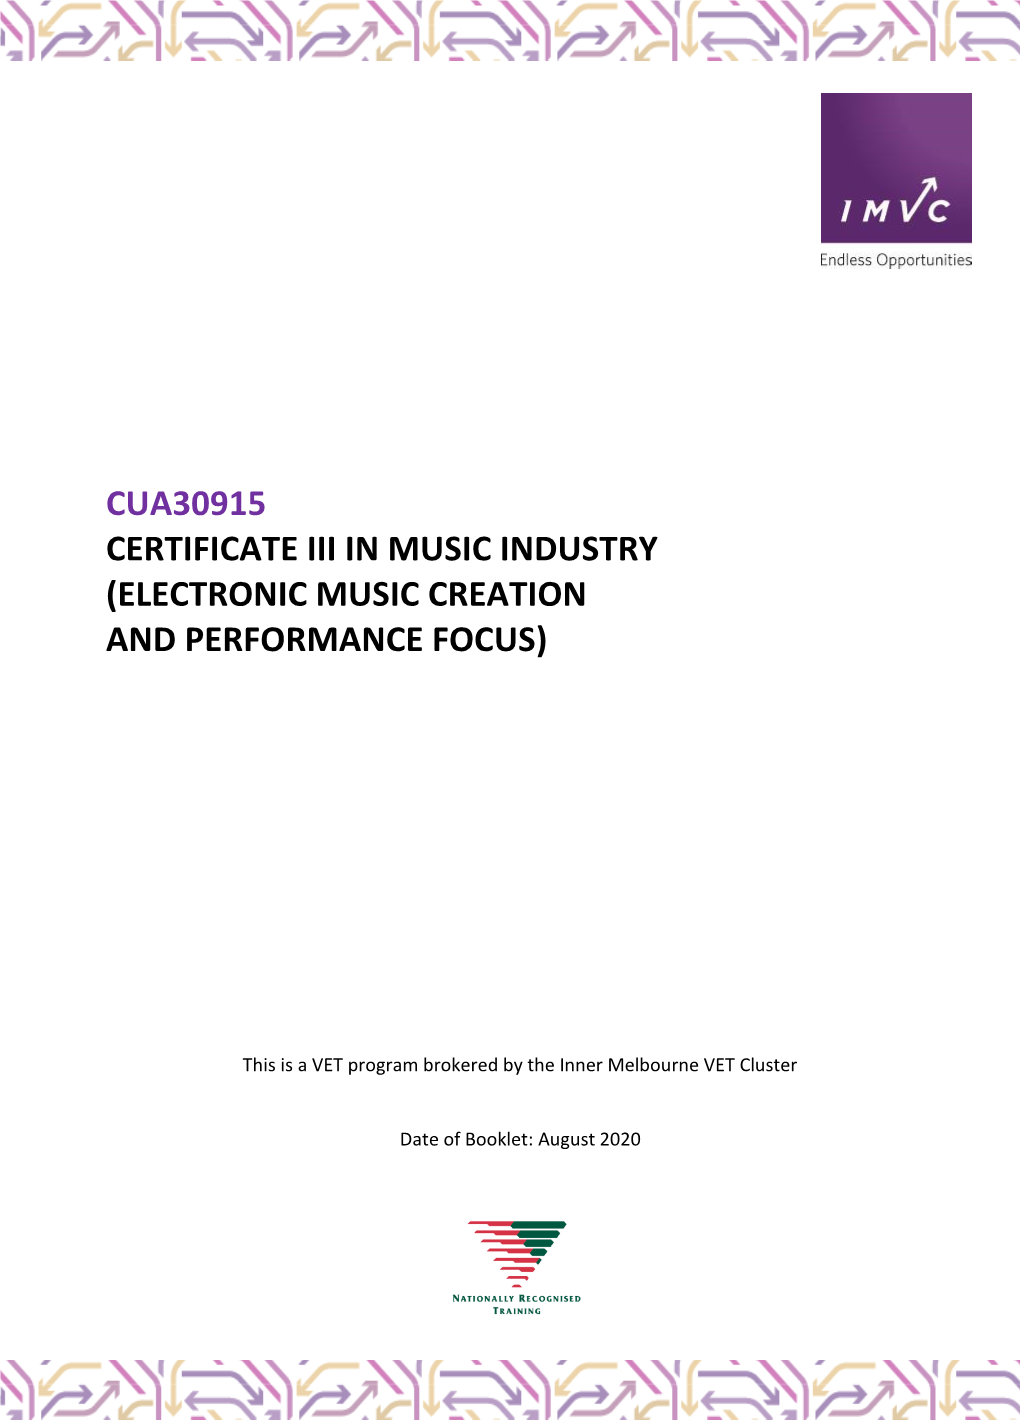 Cua30915 Certificate Iii in Music Industry (Electronic Music Creation and Performance Focus)